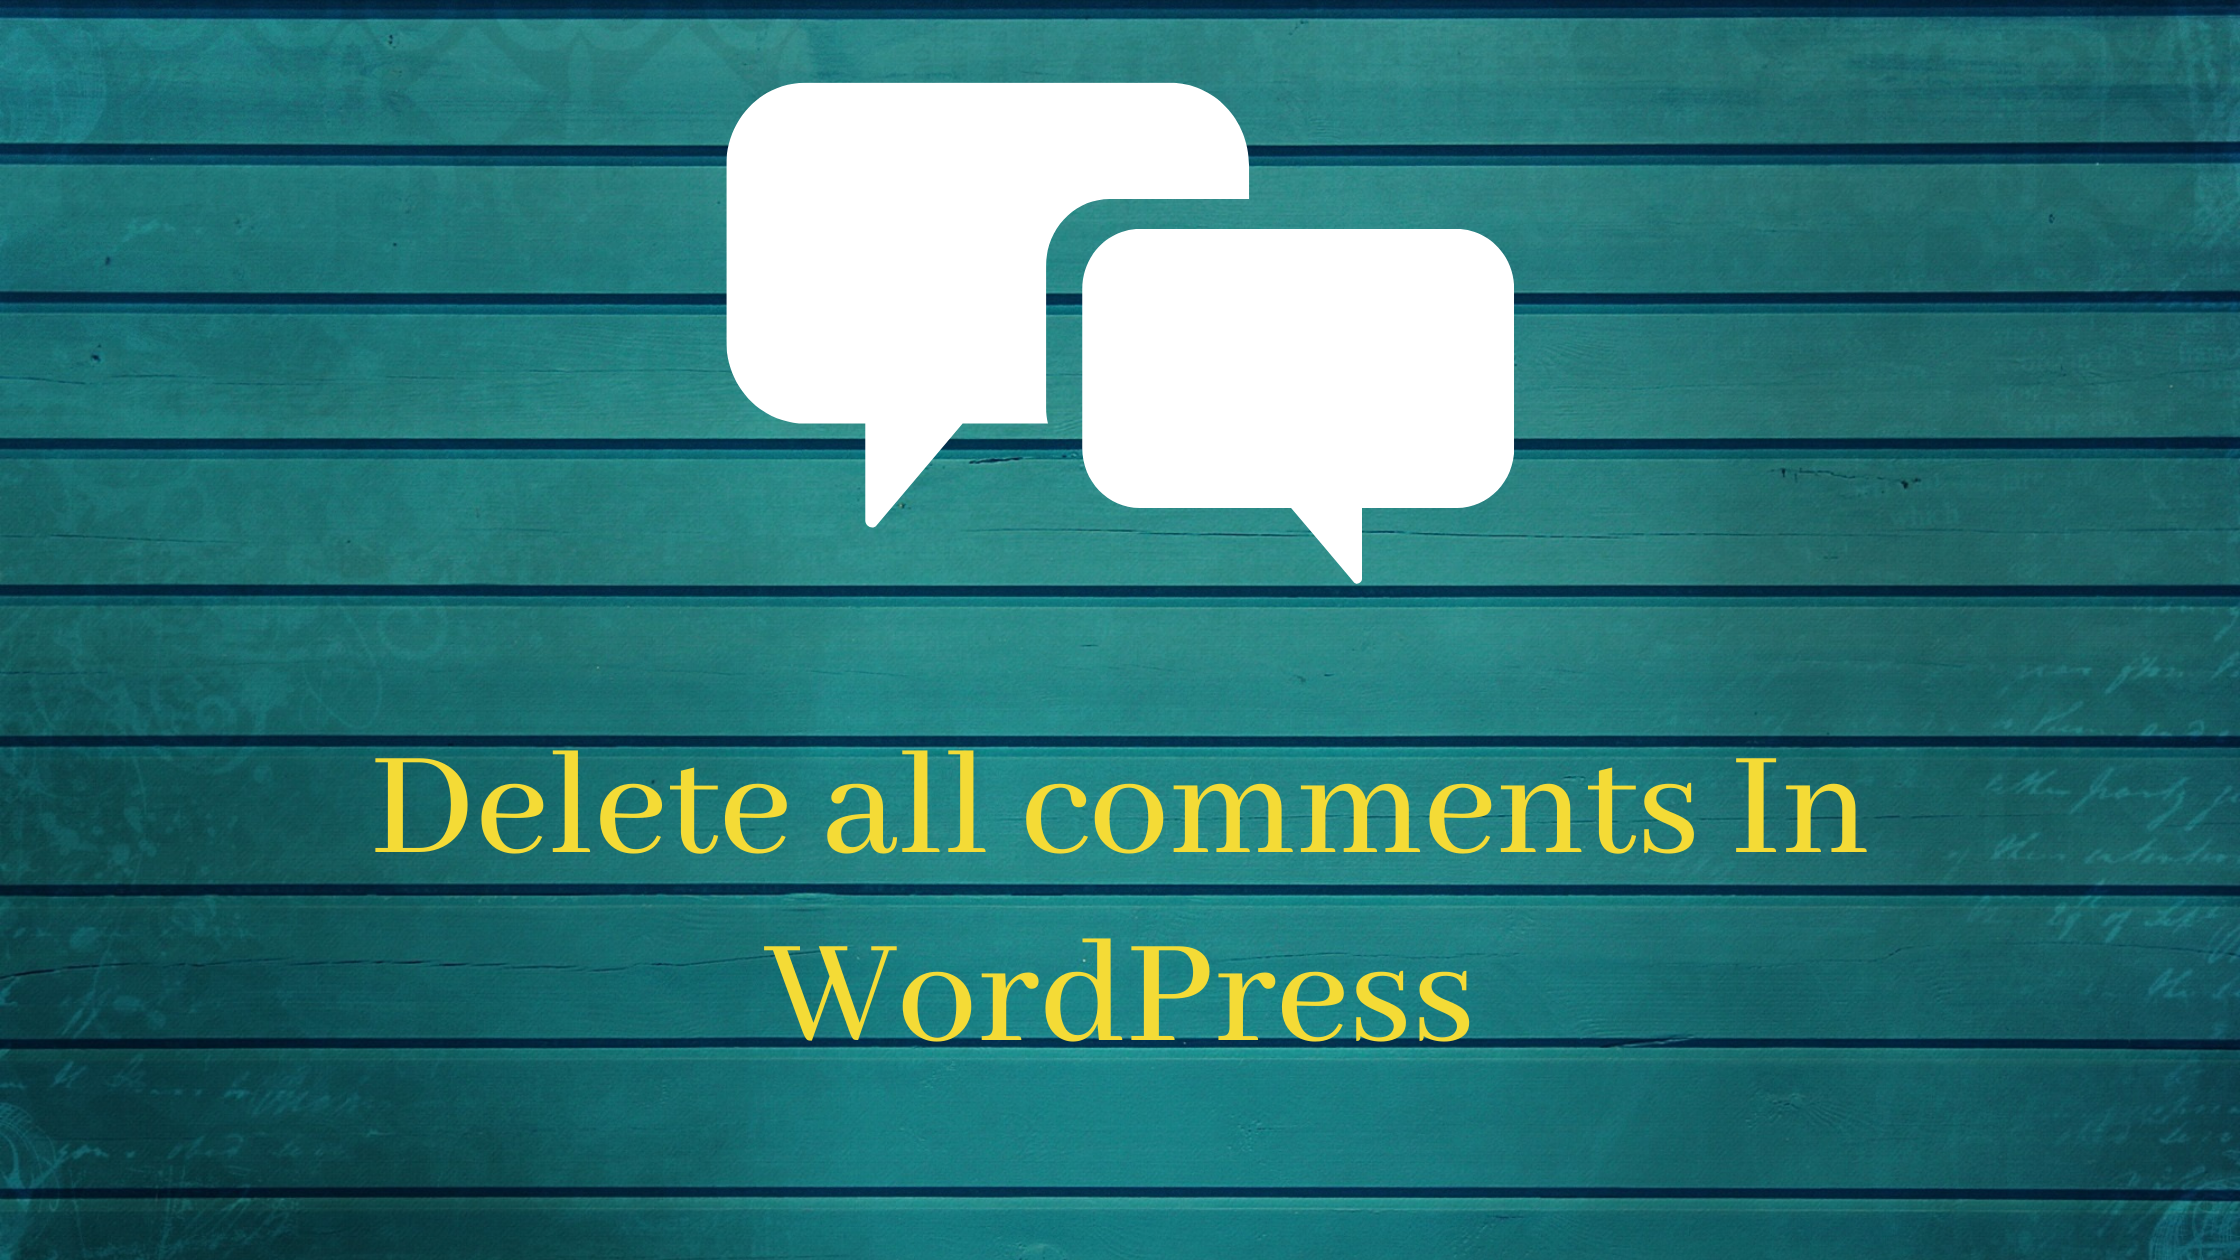 Delete all comments in WordPress